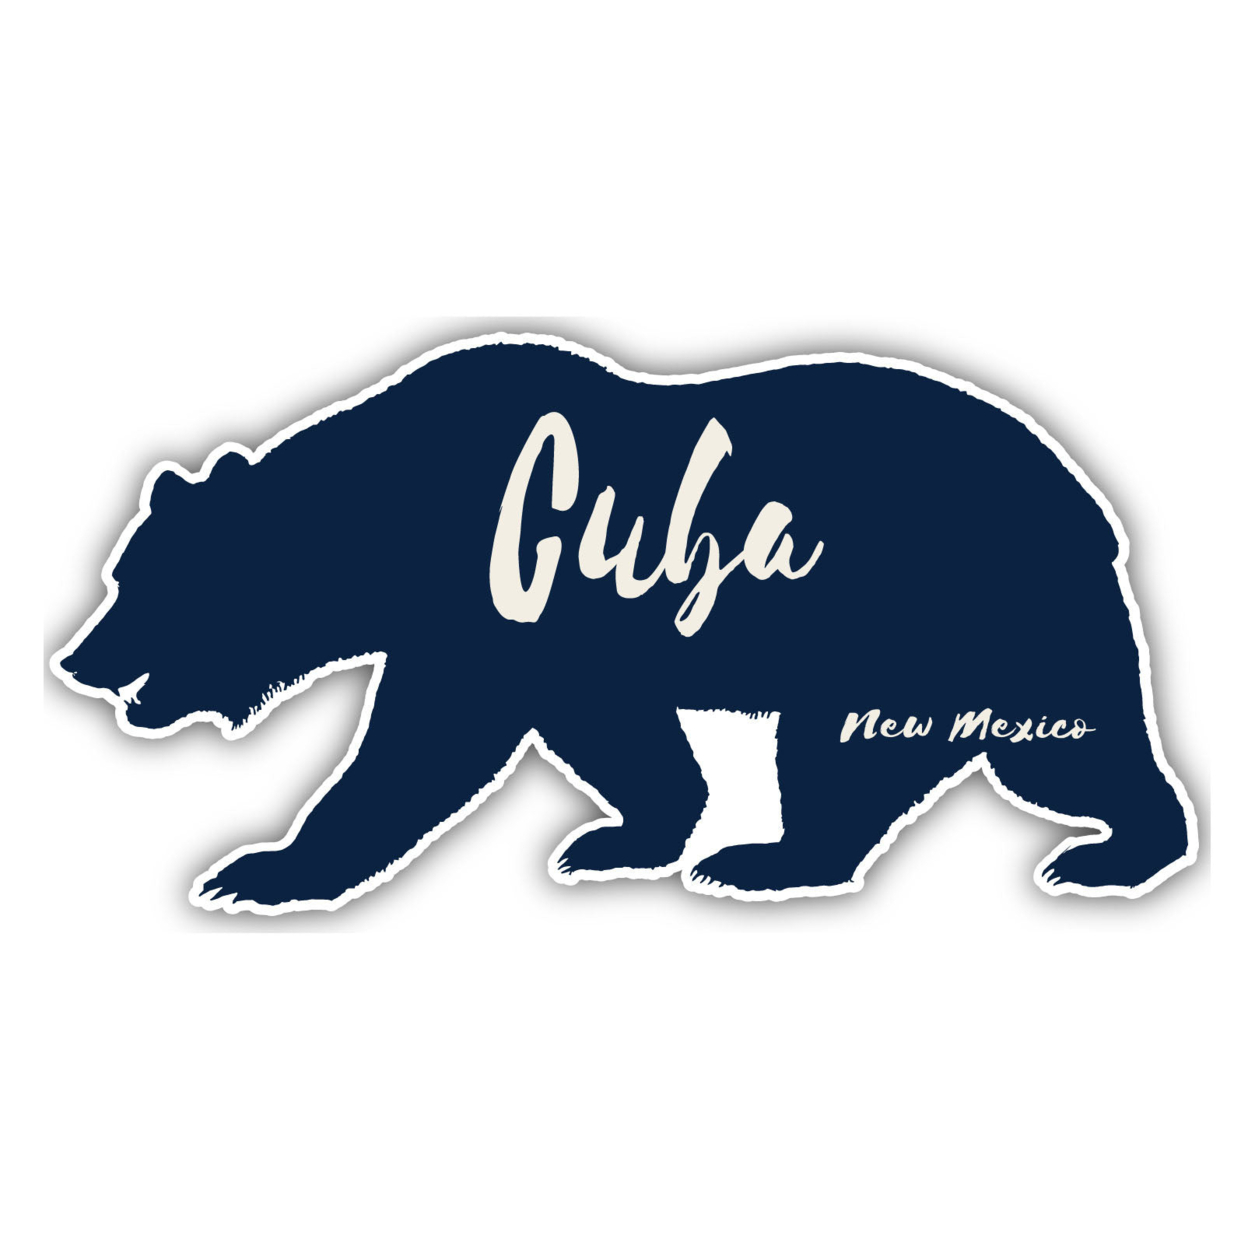 Cuba New Mexico Souvenir Decorative Stickers (Choose Theme And Size) - 4-Pack, 12-Inch, Bear